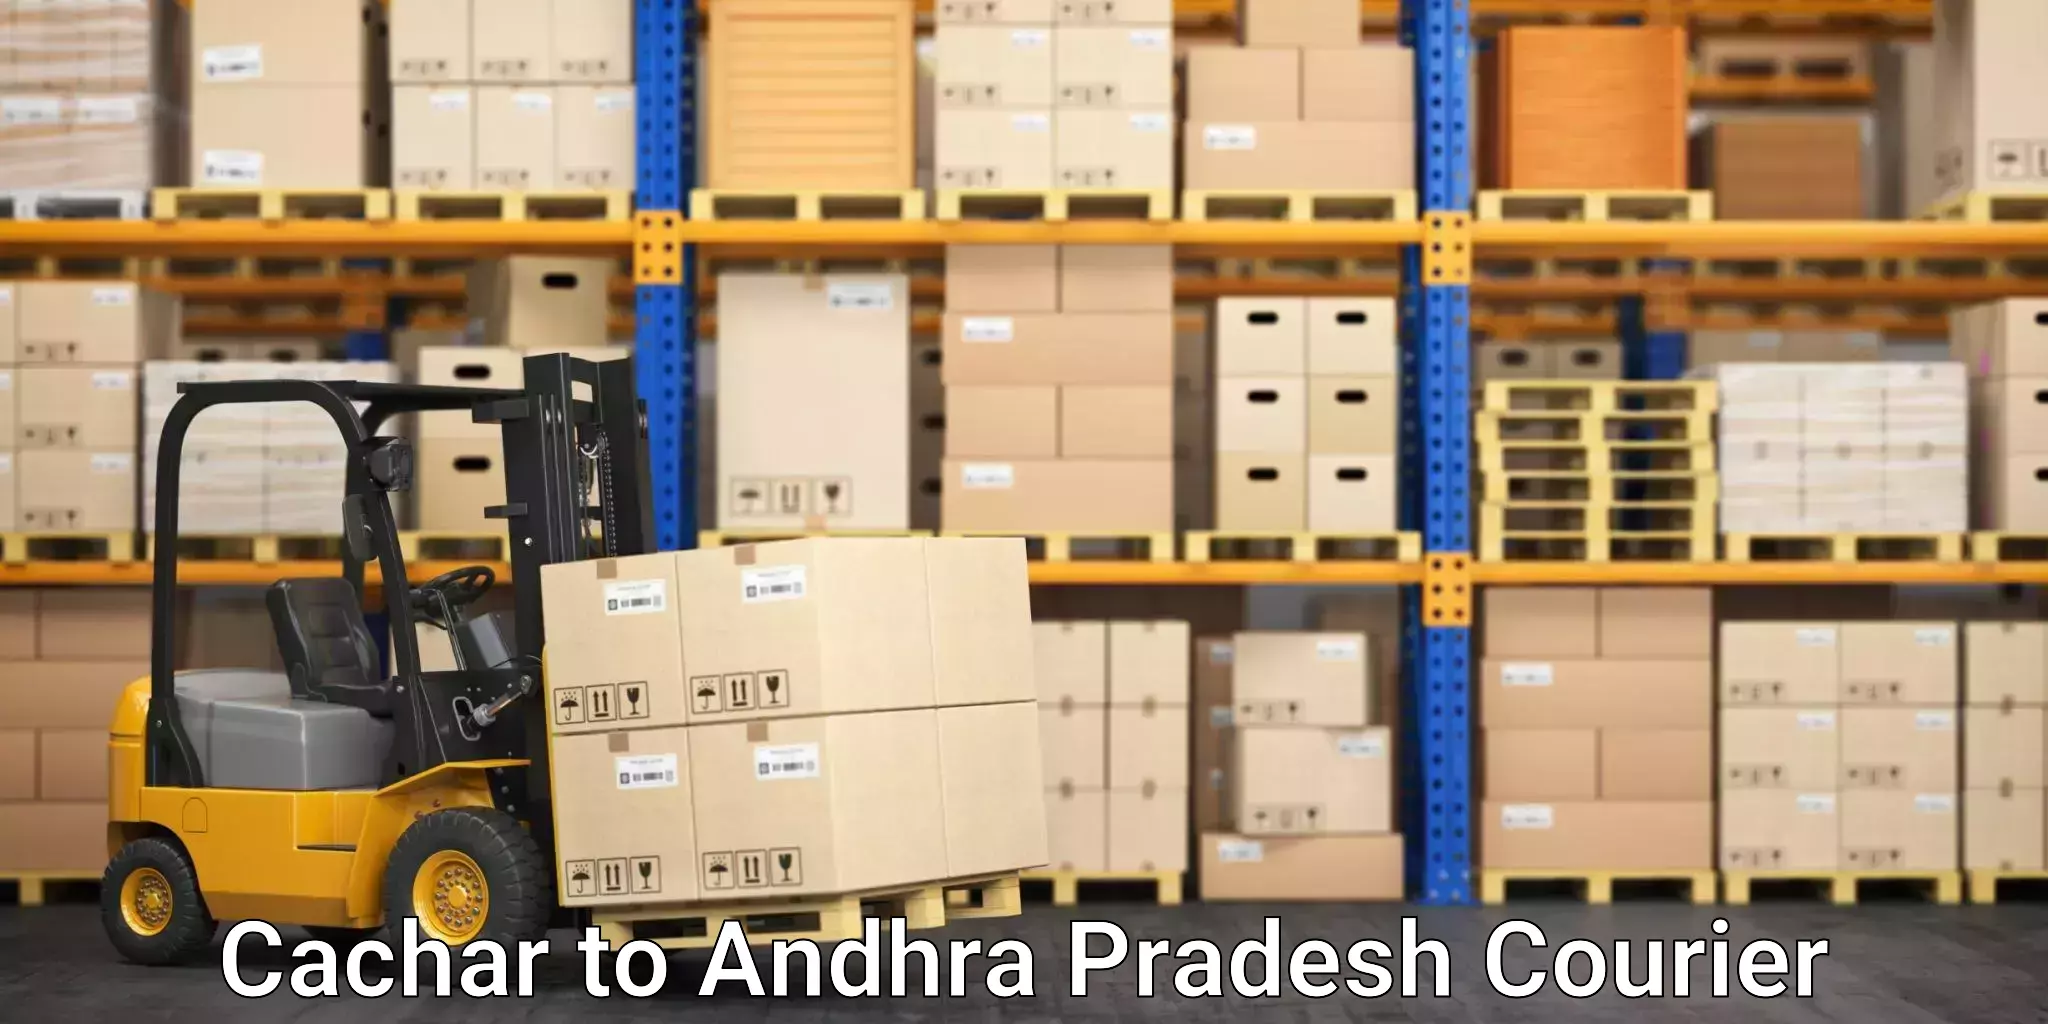 Multi-package shipping Cachar to Narsapur